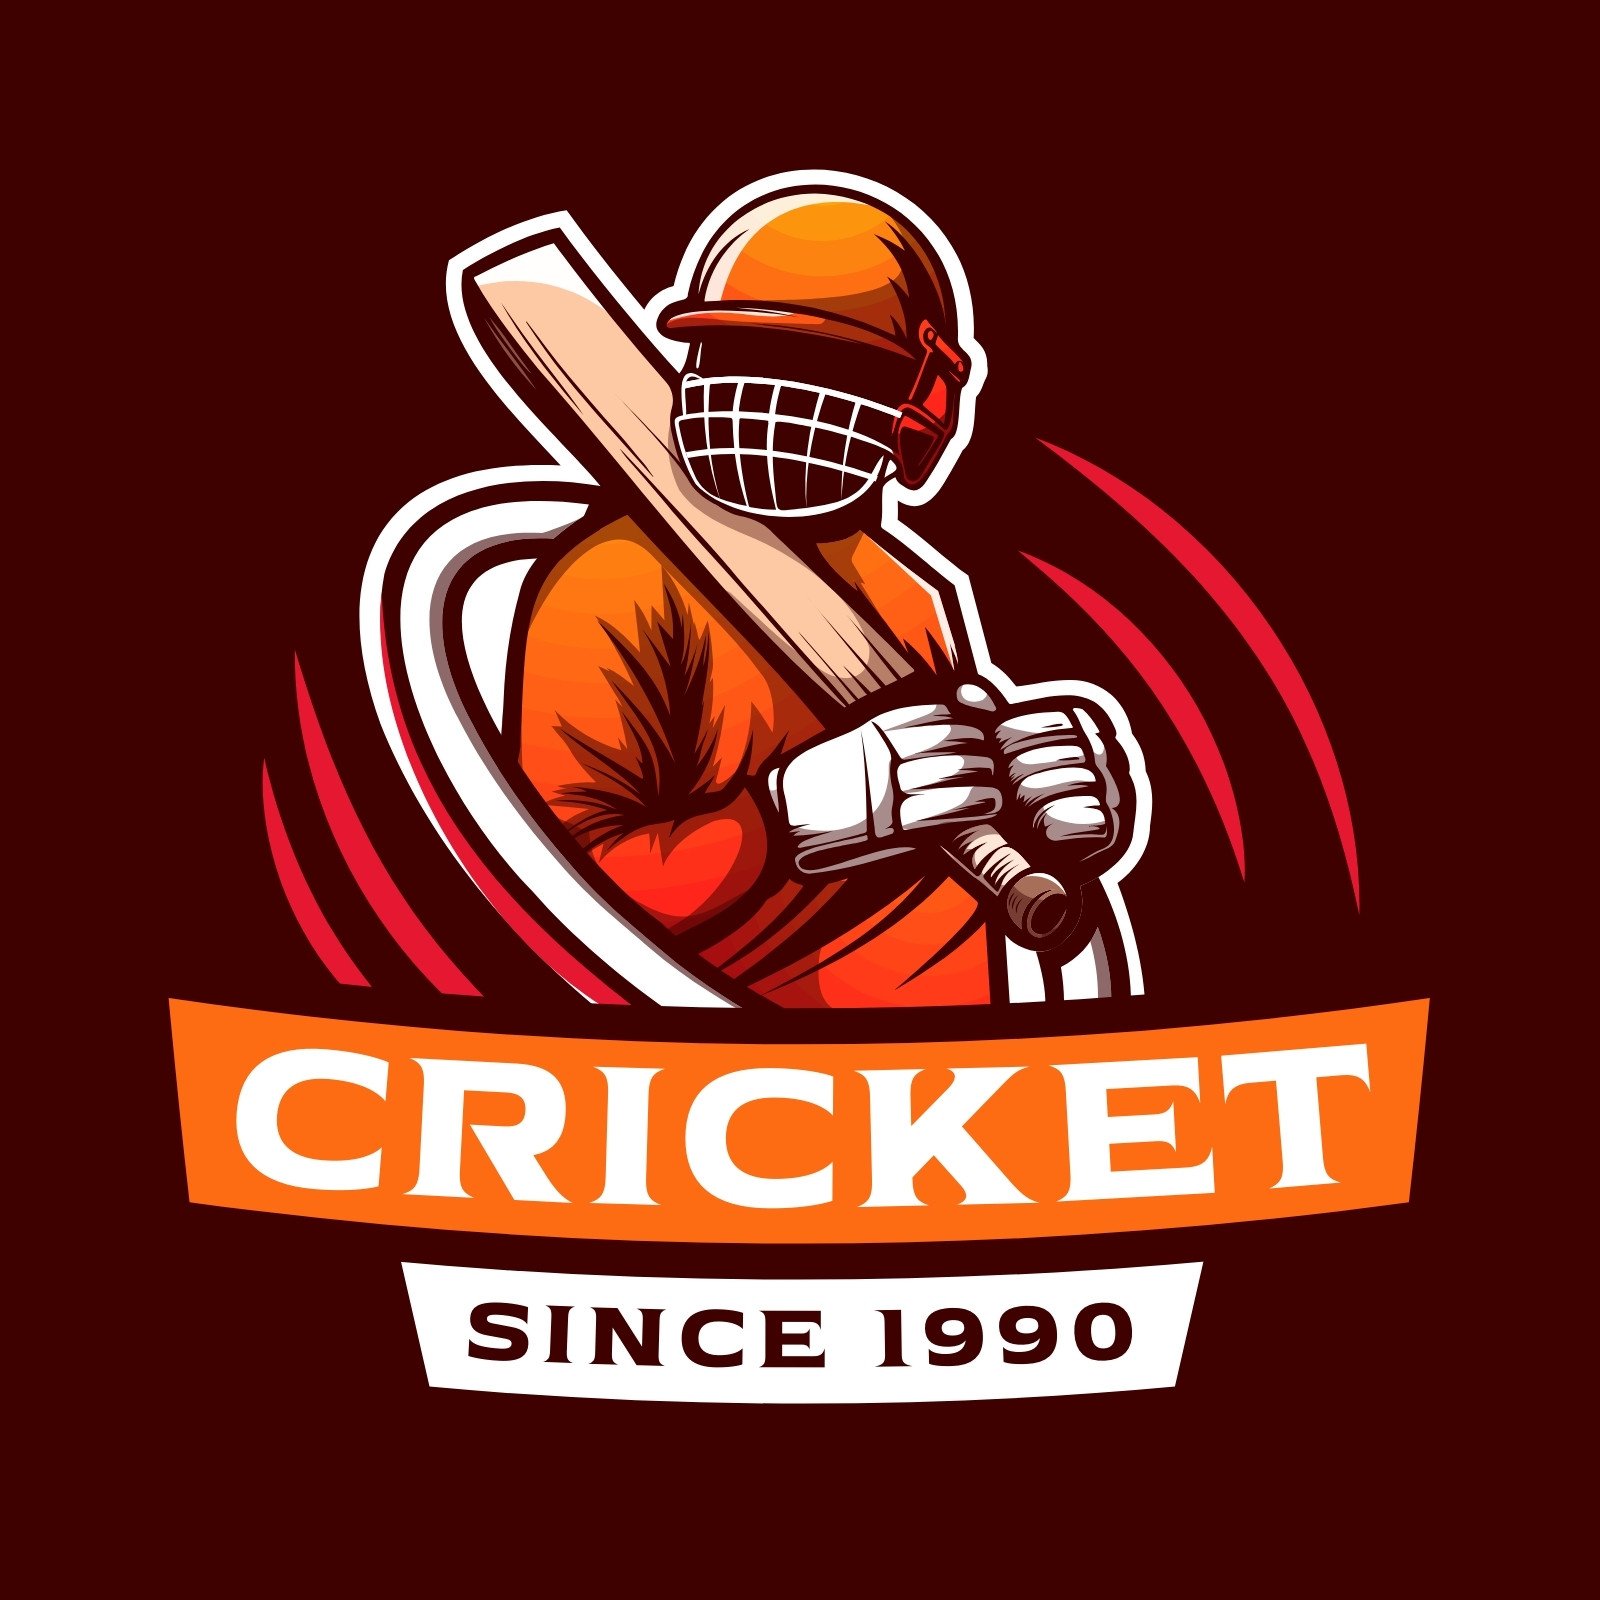 All about cricket